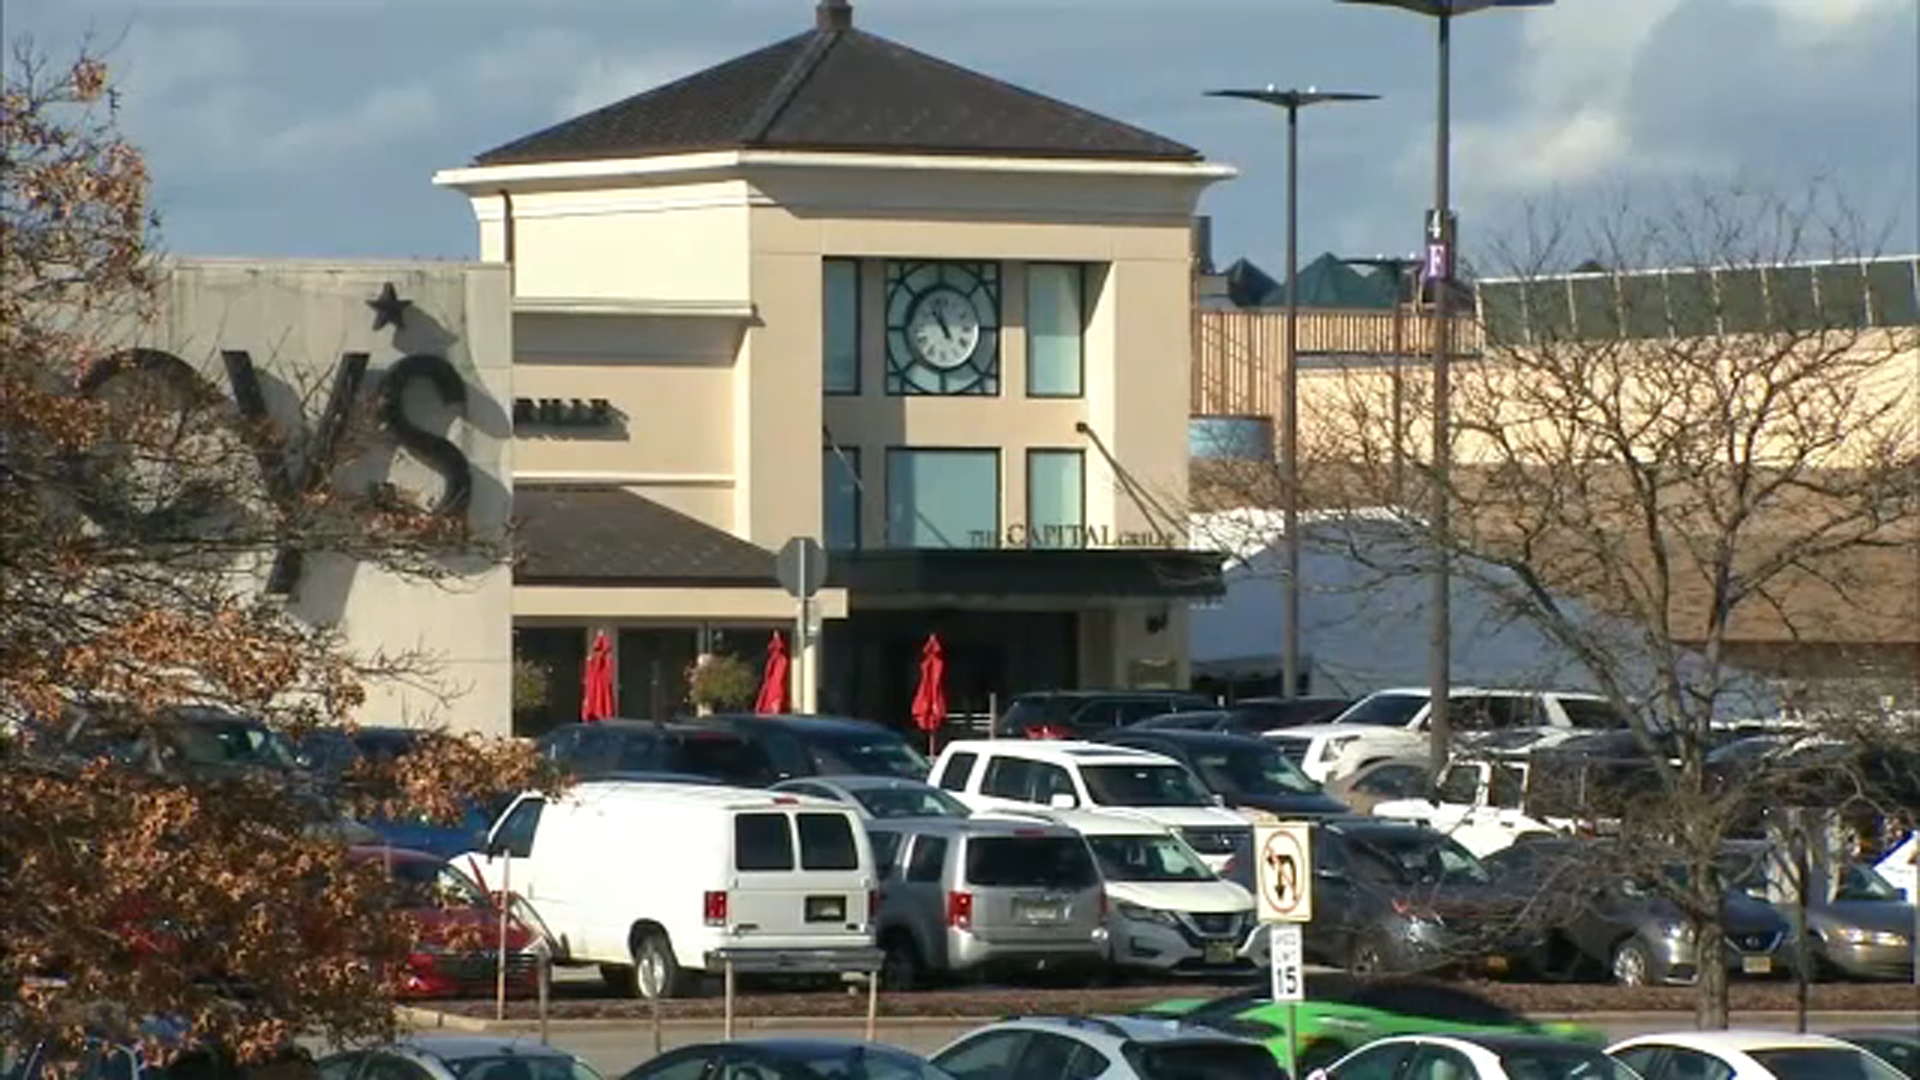 Garden State Plaza Mall Announces Adult Chaperone Policy – NBC New